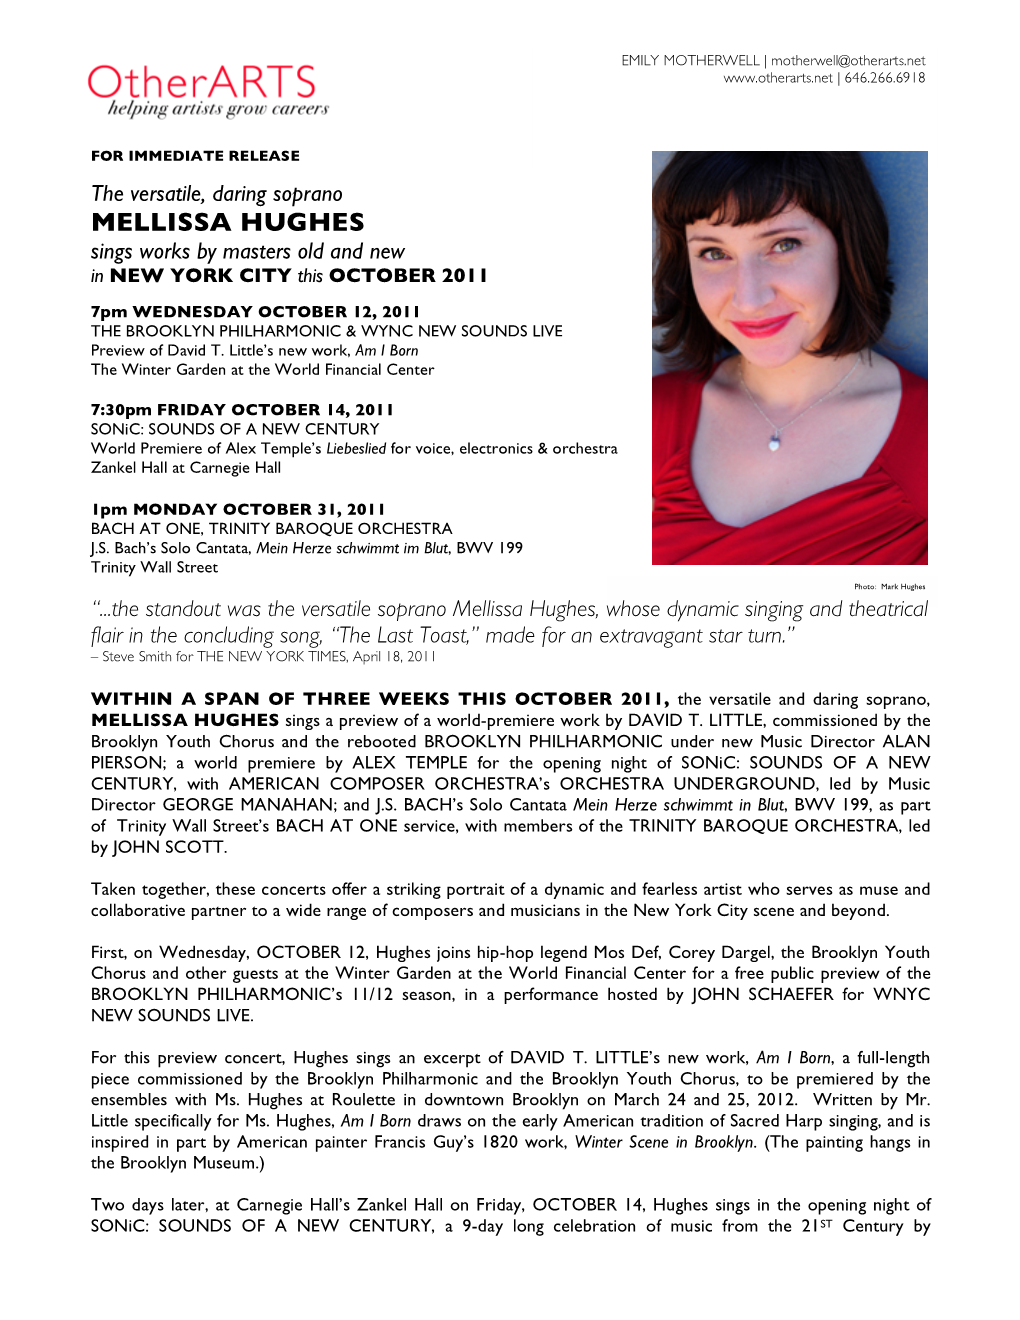 MELLISSA HUGHES Sings Works by Masters Old and New in NEW YORK CITY This OCTOBER 2011